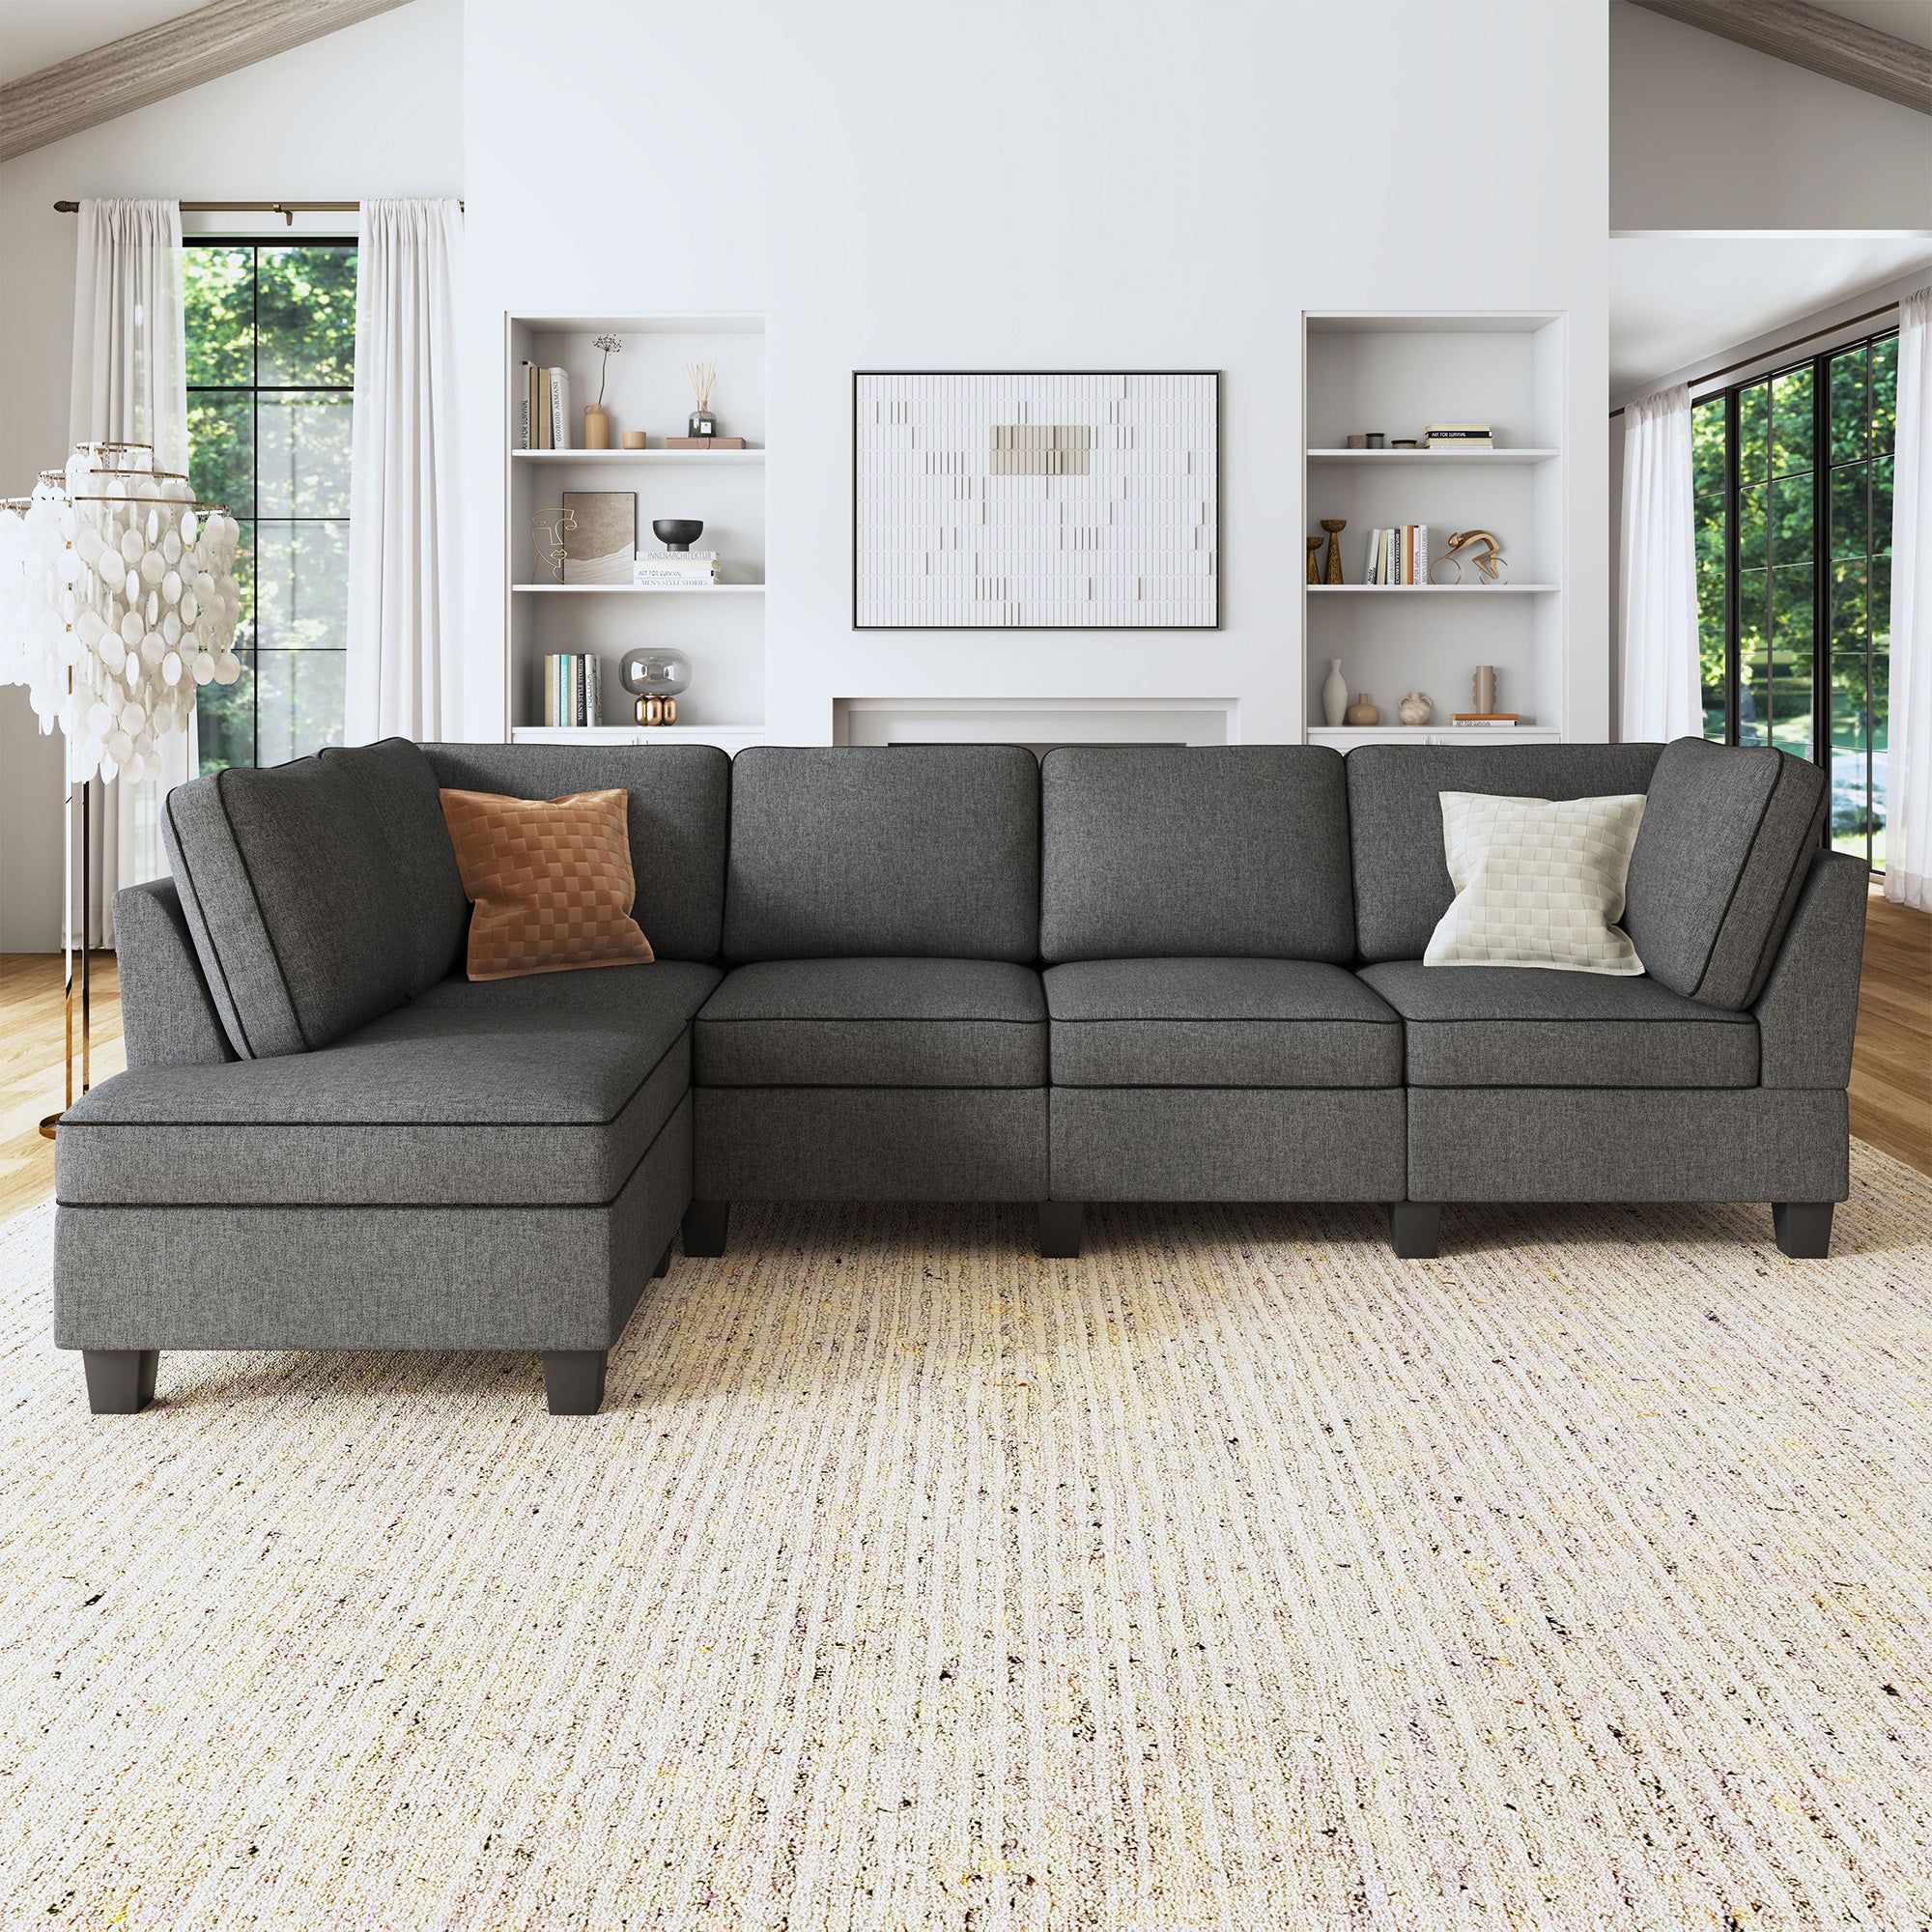 HONBAY 4-Seat L-Shaped Sectional Corner Sofa with Reversible Chaise